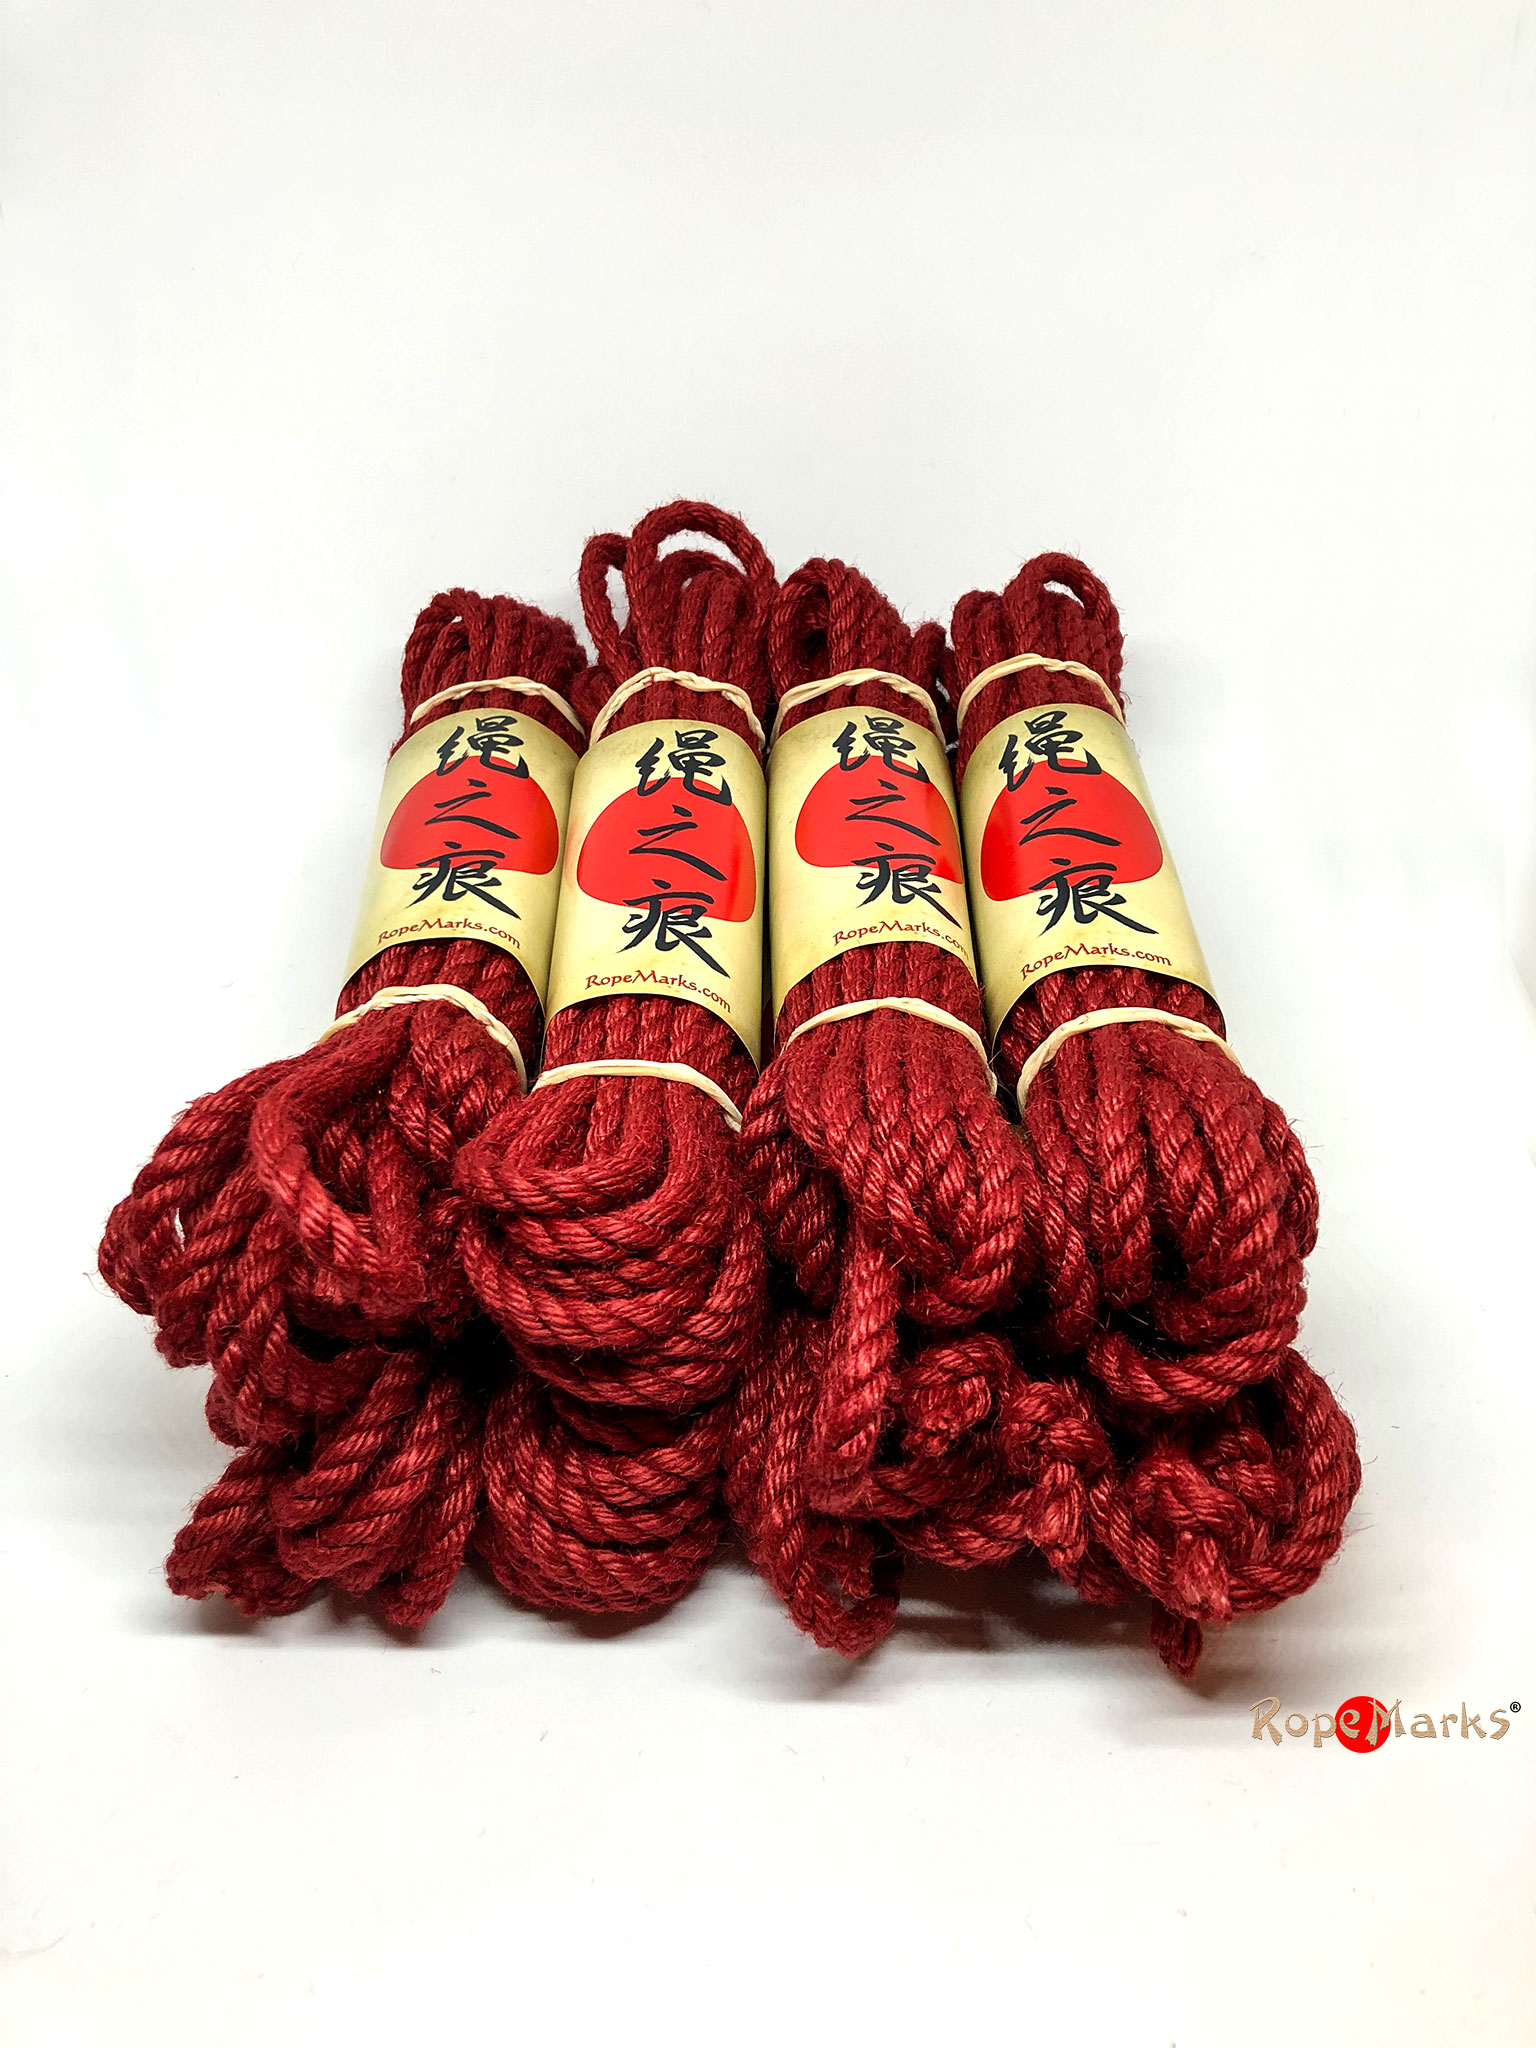 Red jute rope (treated, 6mm)